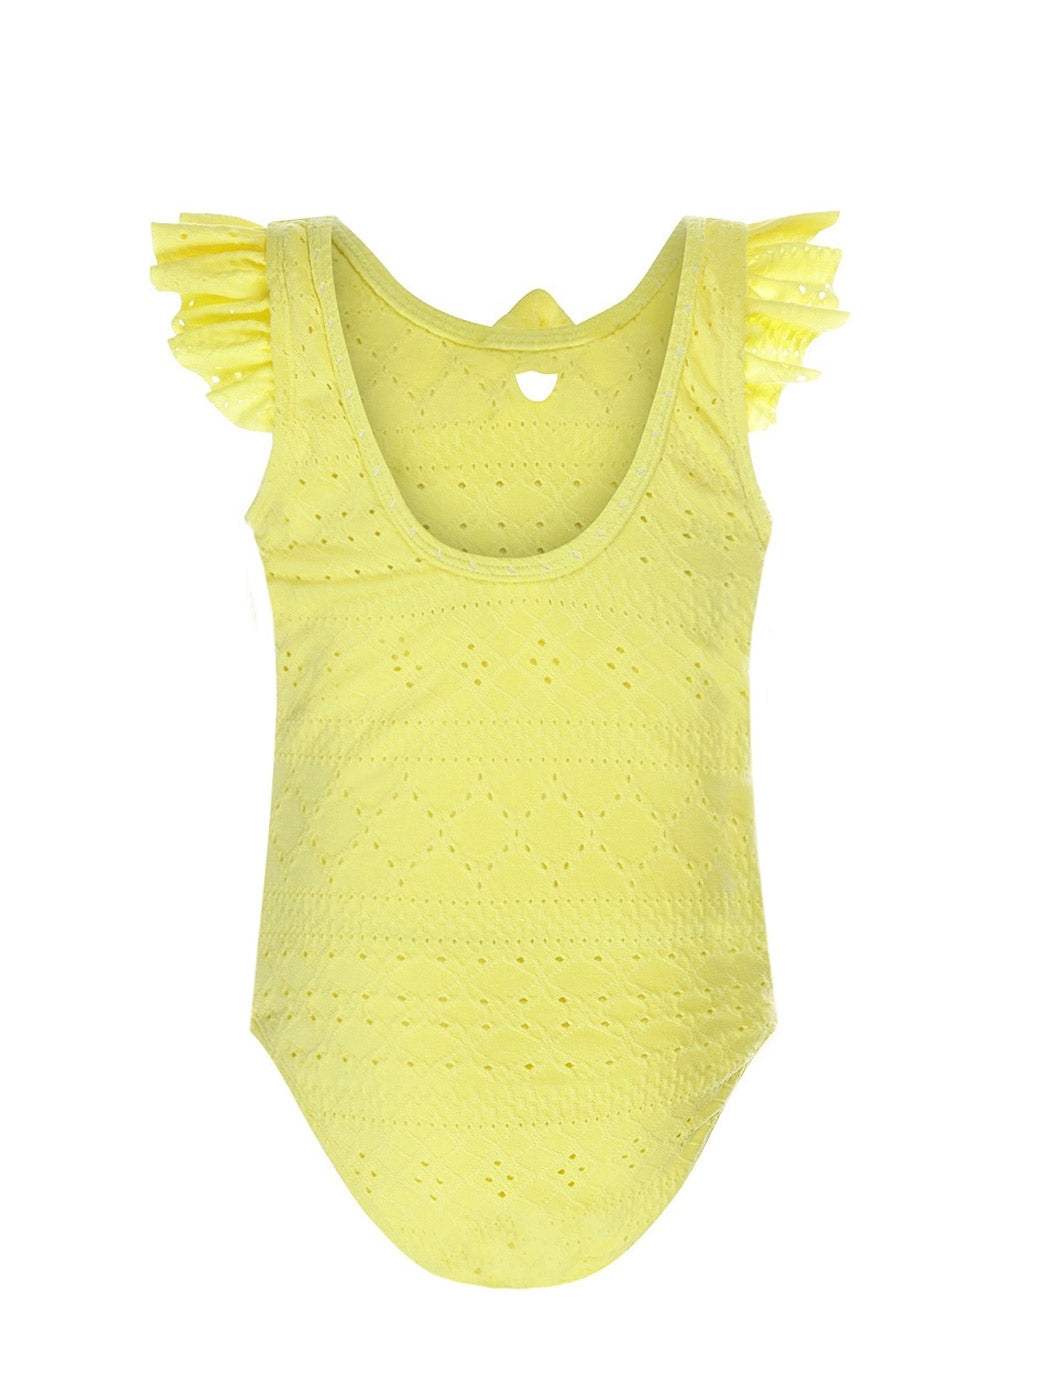 Girls swimsuit with embroidery - T46928-37 Yellow